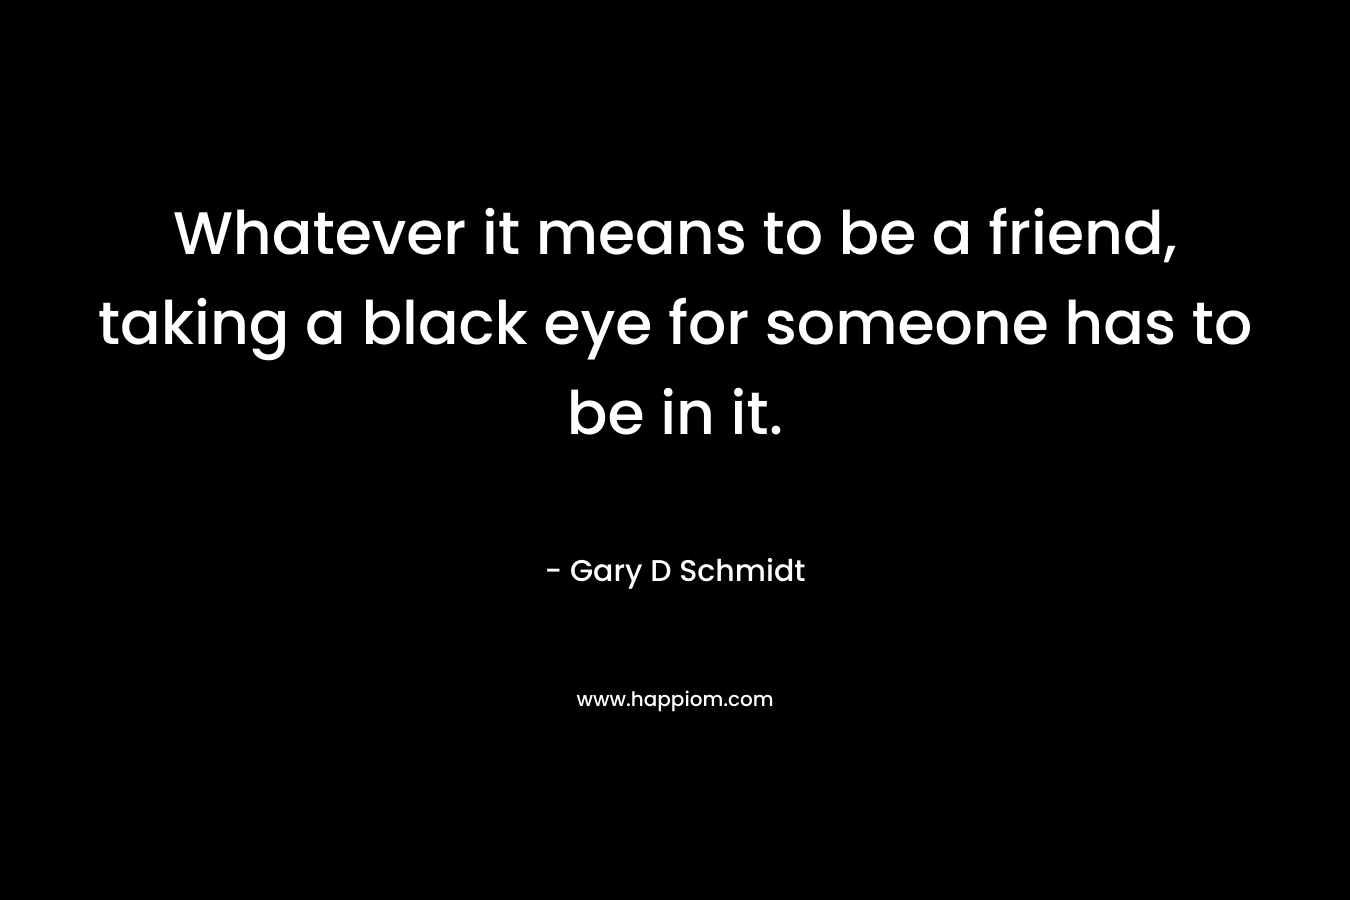 Whatever it means to be a friend, taking a black eye for someone has to be in it.